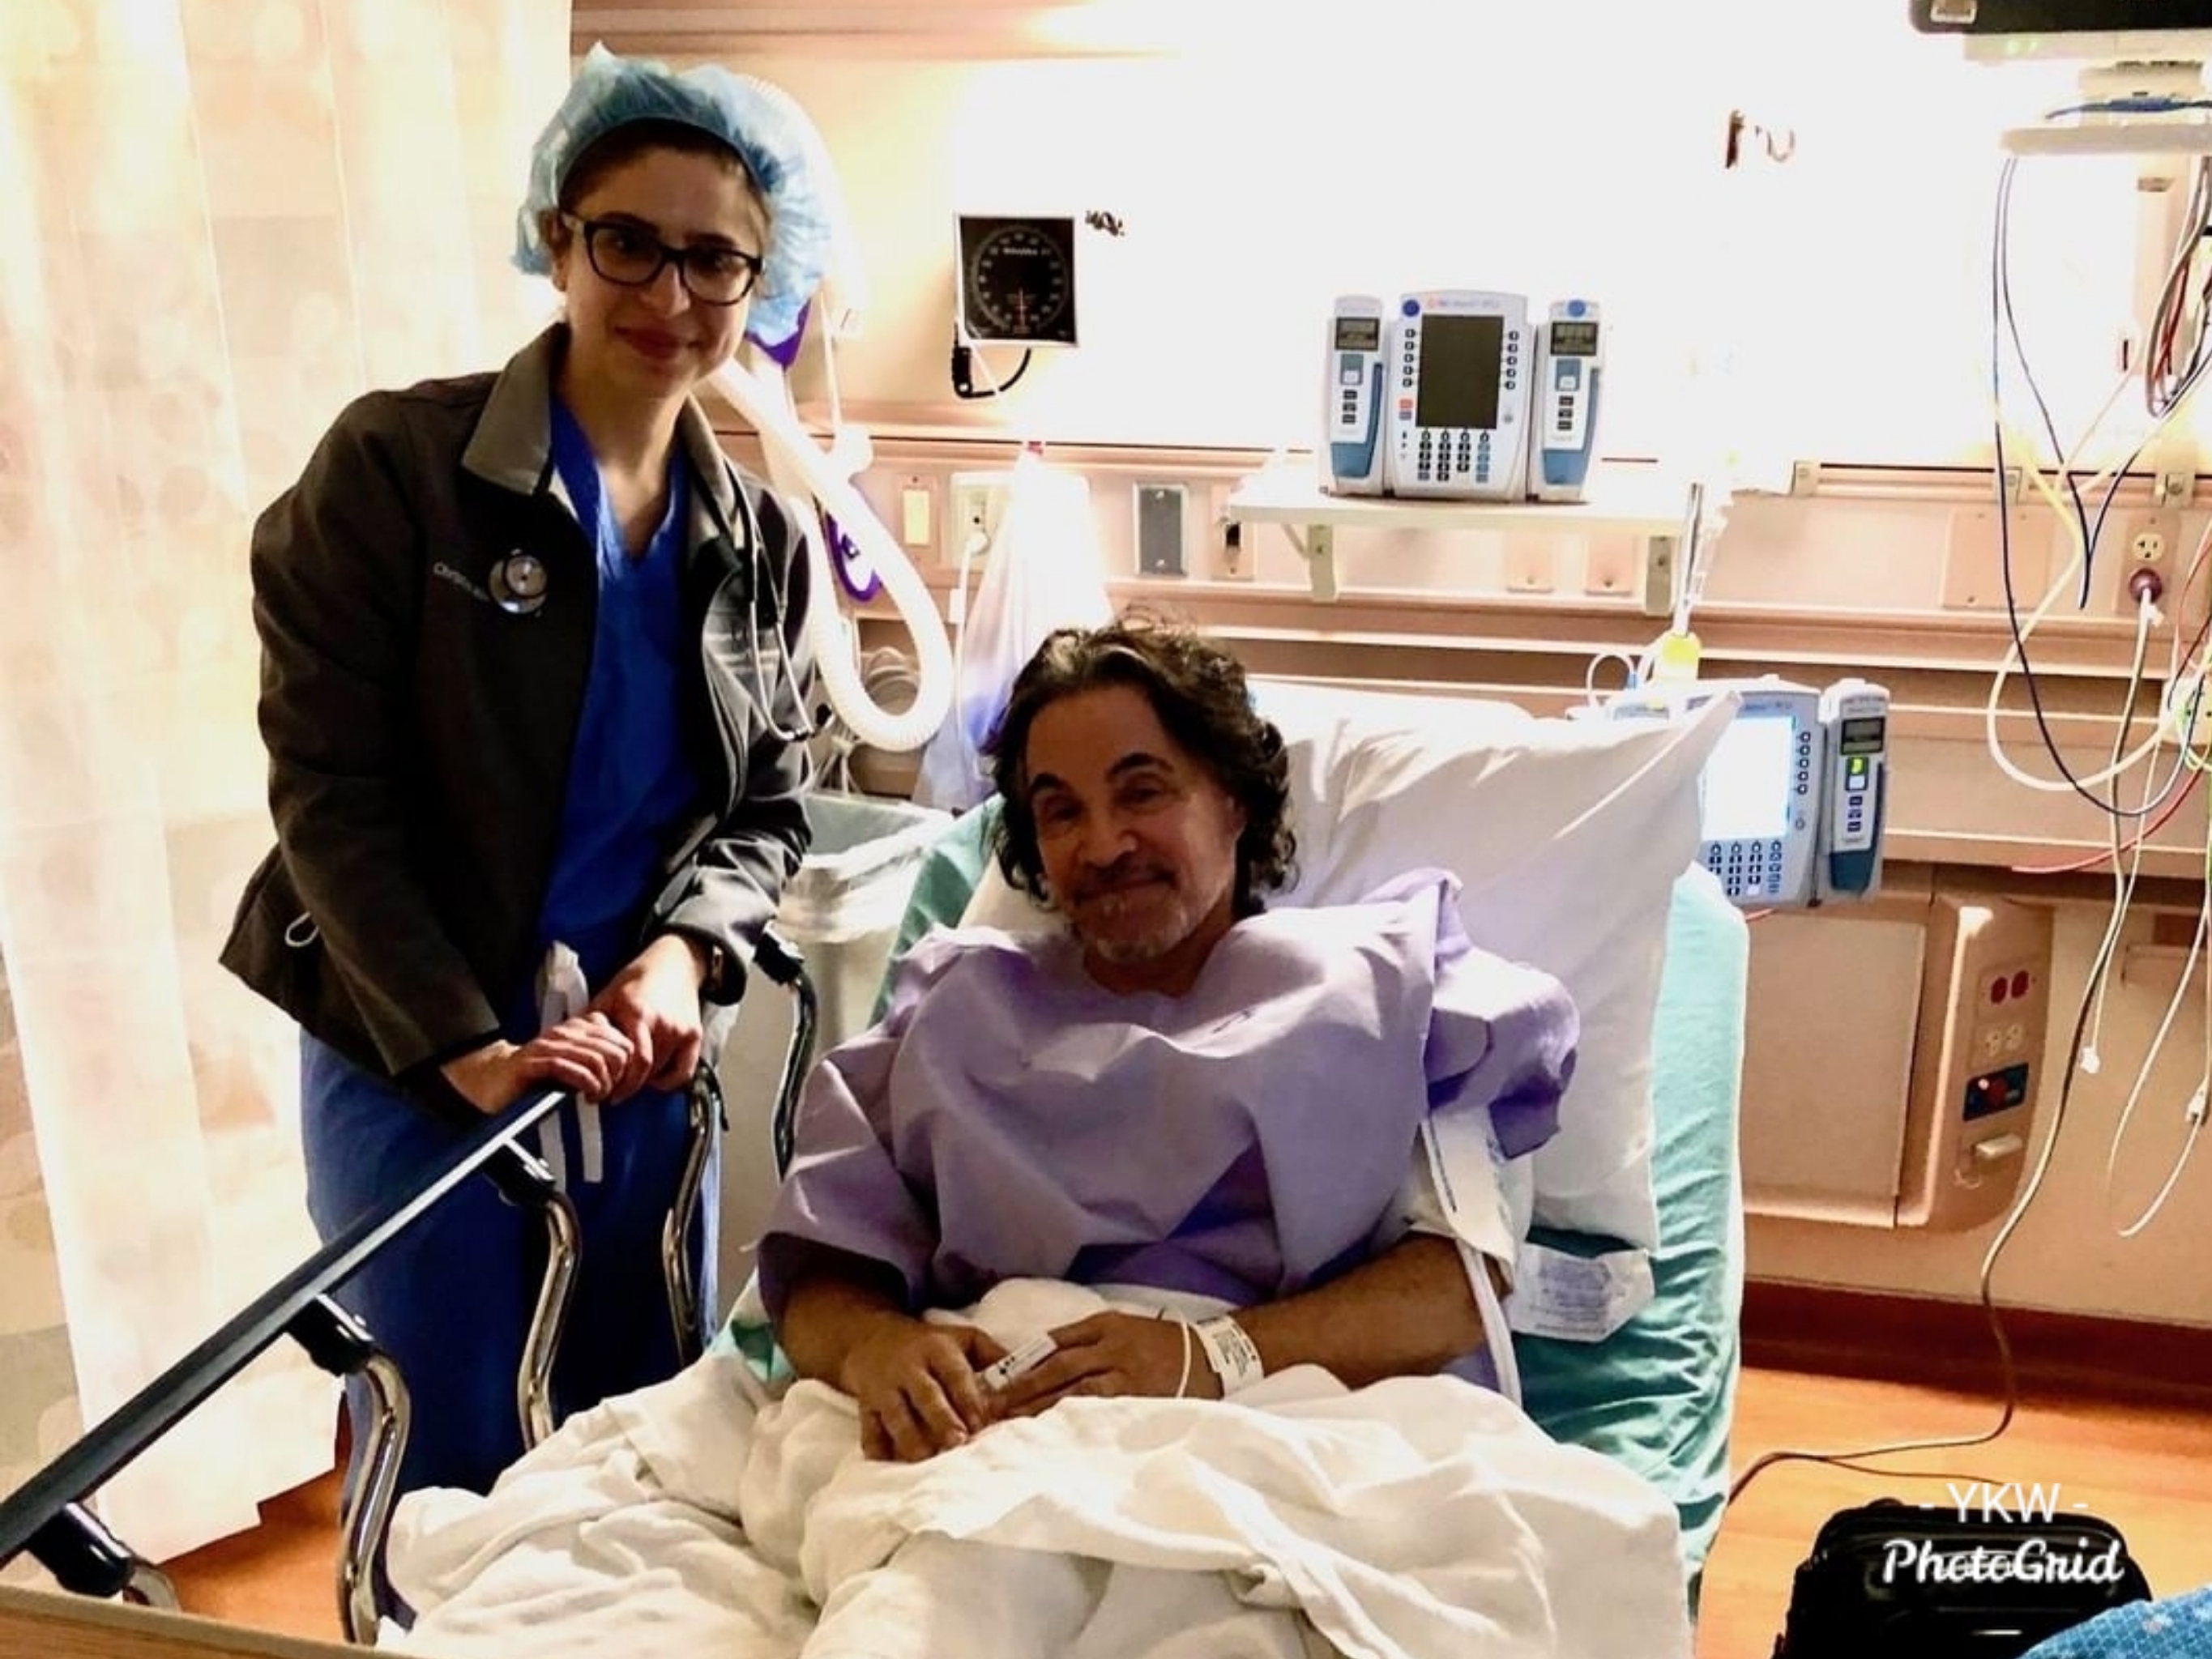 John Oates, Of Hall And Oates, Is Recovering From Surgery After “Frightening” Experience